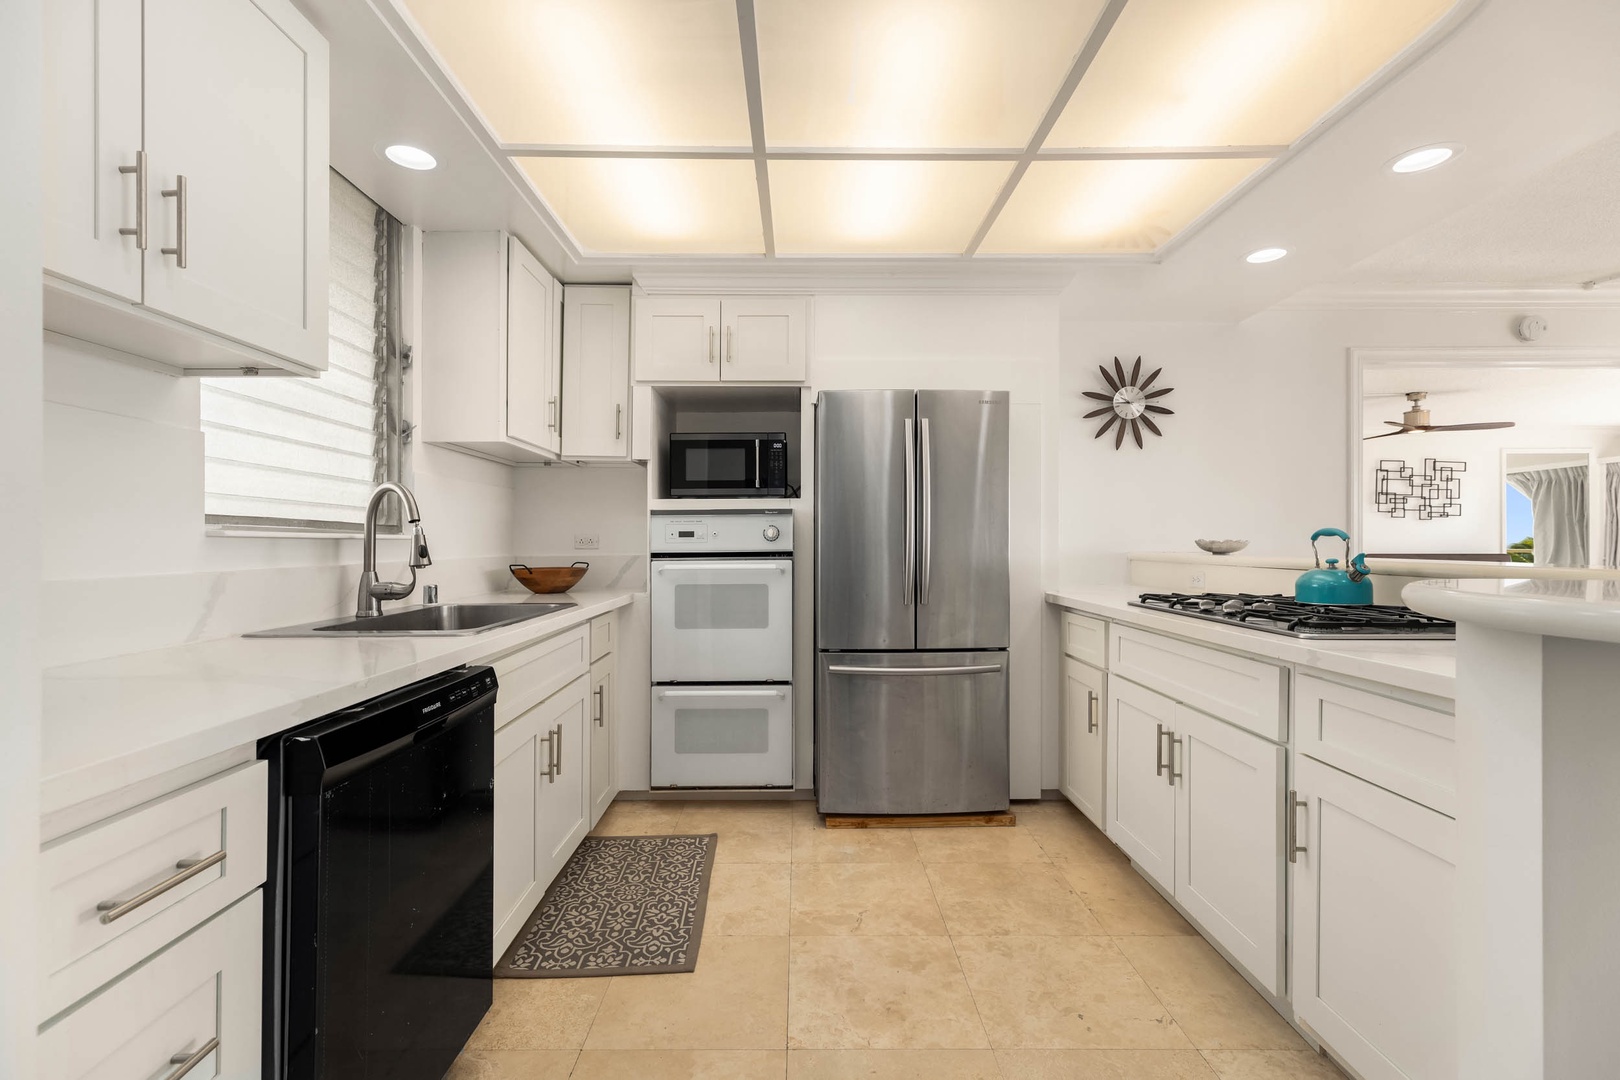 Honolulu Vacation Rentals, Colony Surf Getaway - Contemporary kitchen equipped with top-of-the-line appliances for a seamless cooking experience.